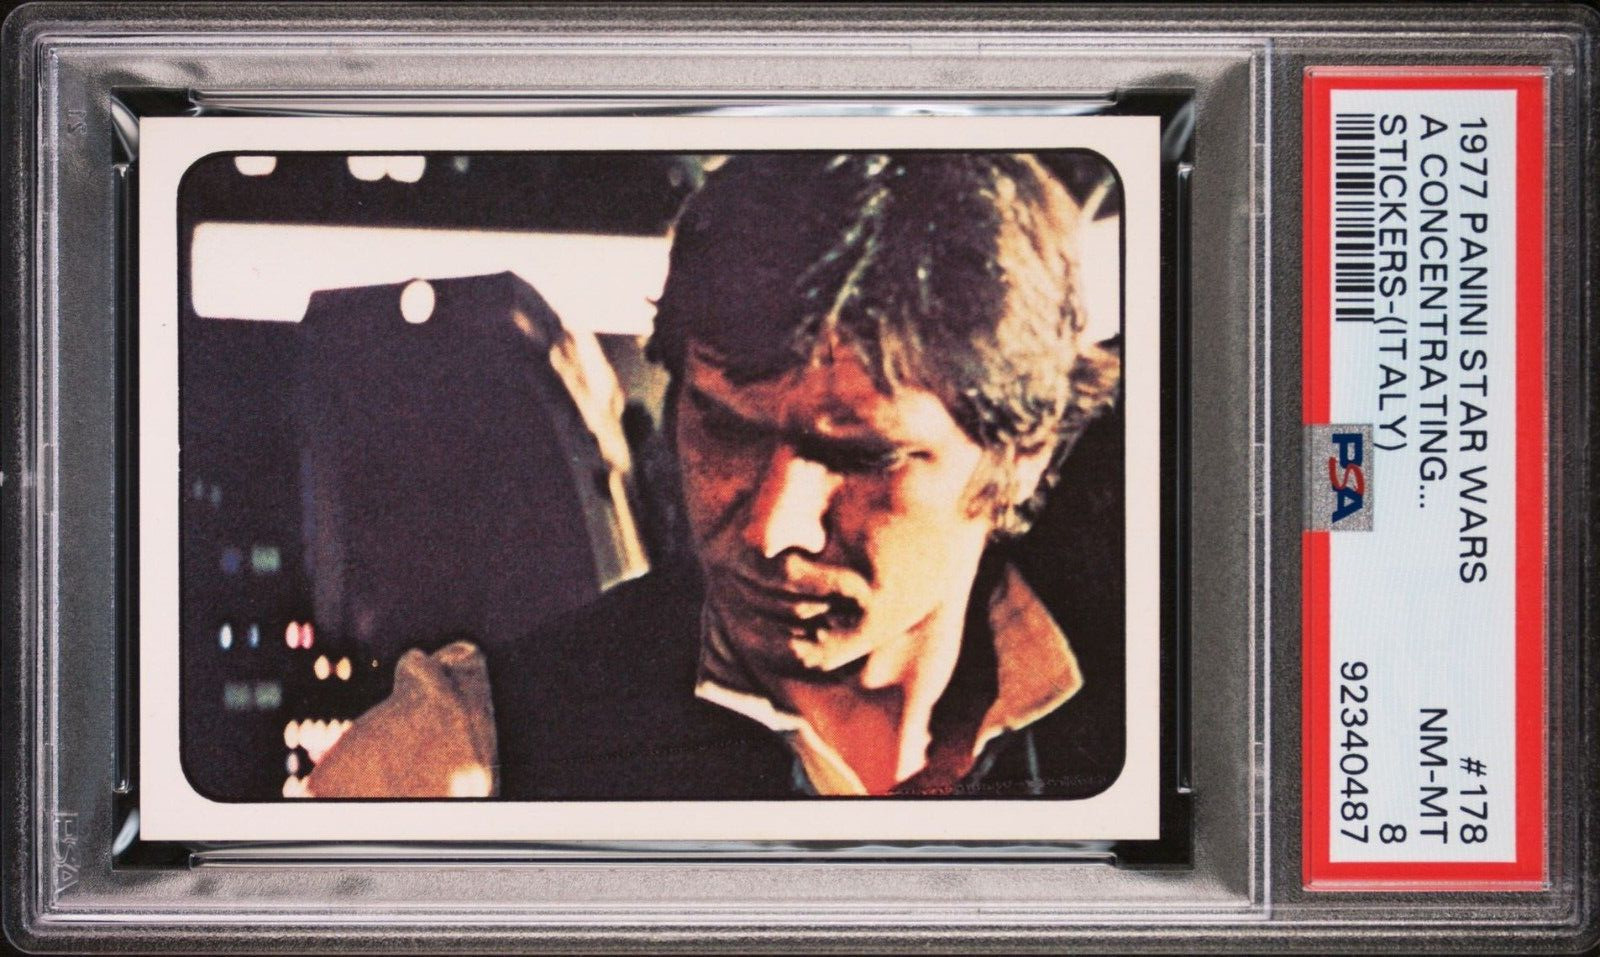 1977 PANINI STICKERS STAR WARS (ITALY) 178 A CONCENTRATING HAN SOLO PSA 8